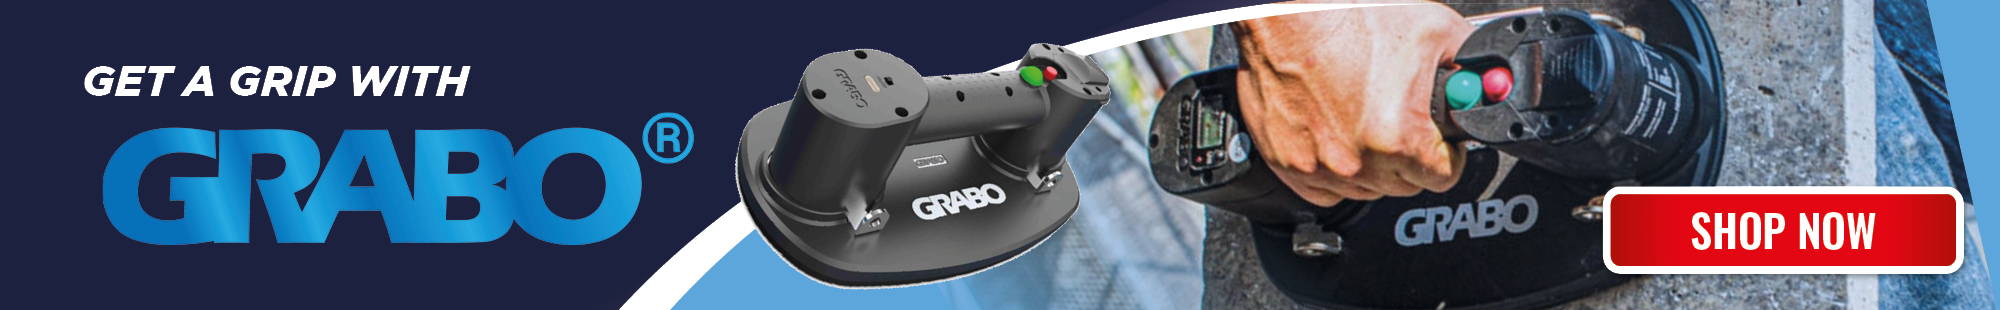 Grabo Suction Lifter